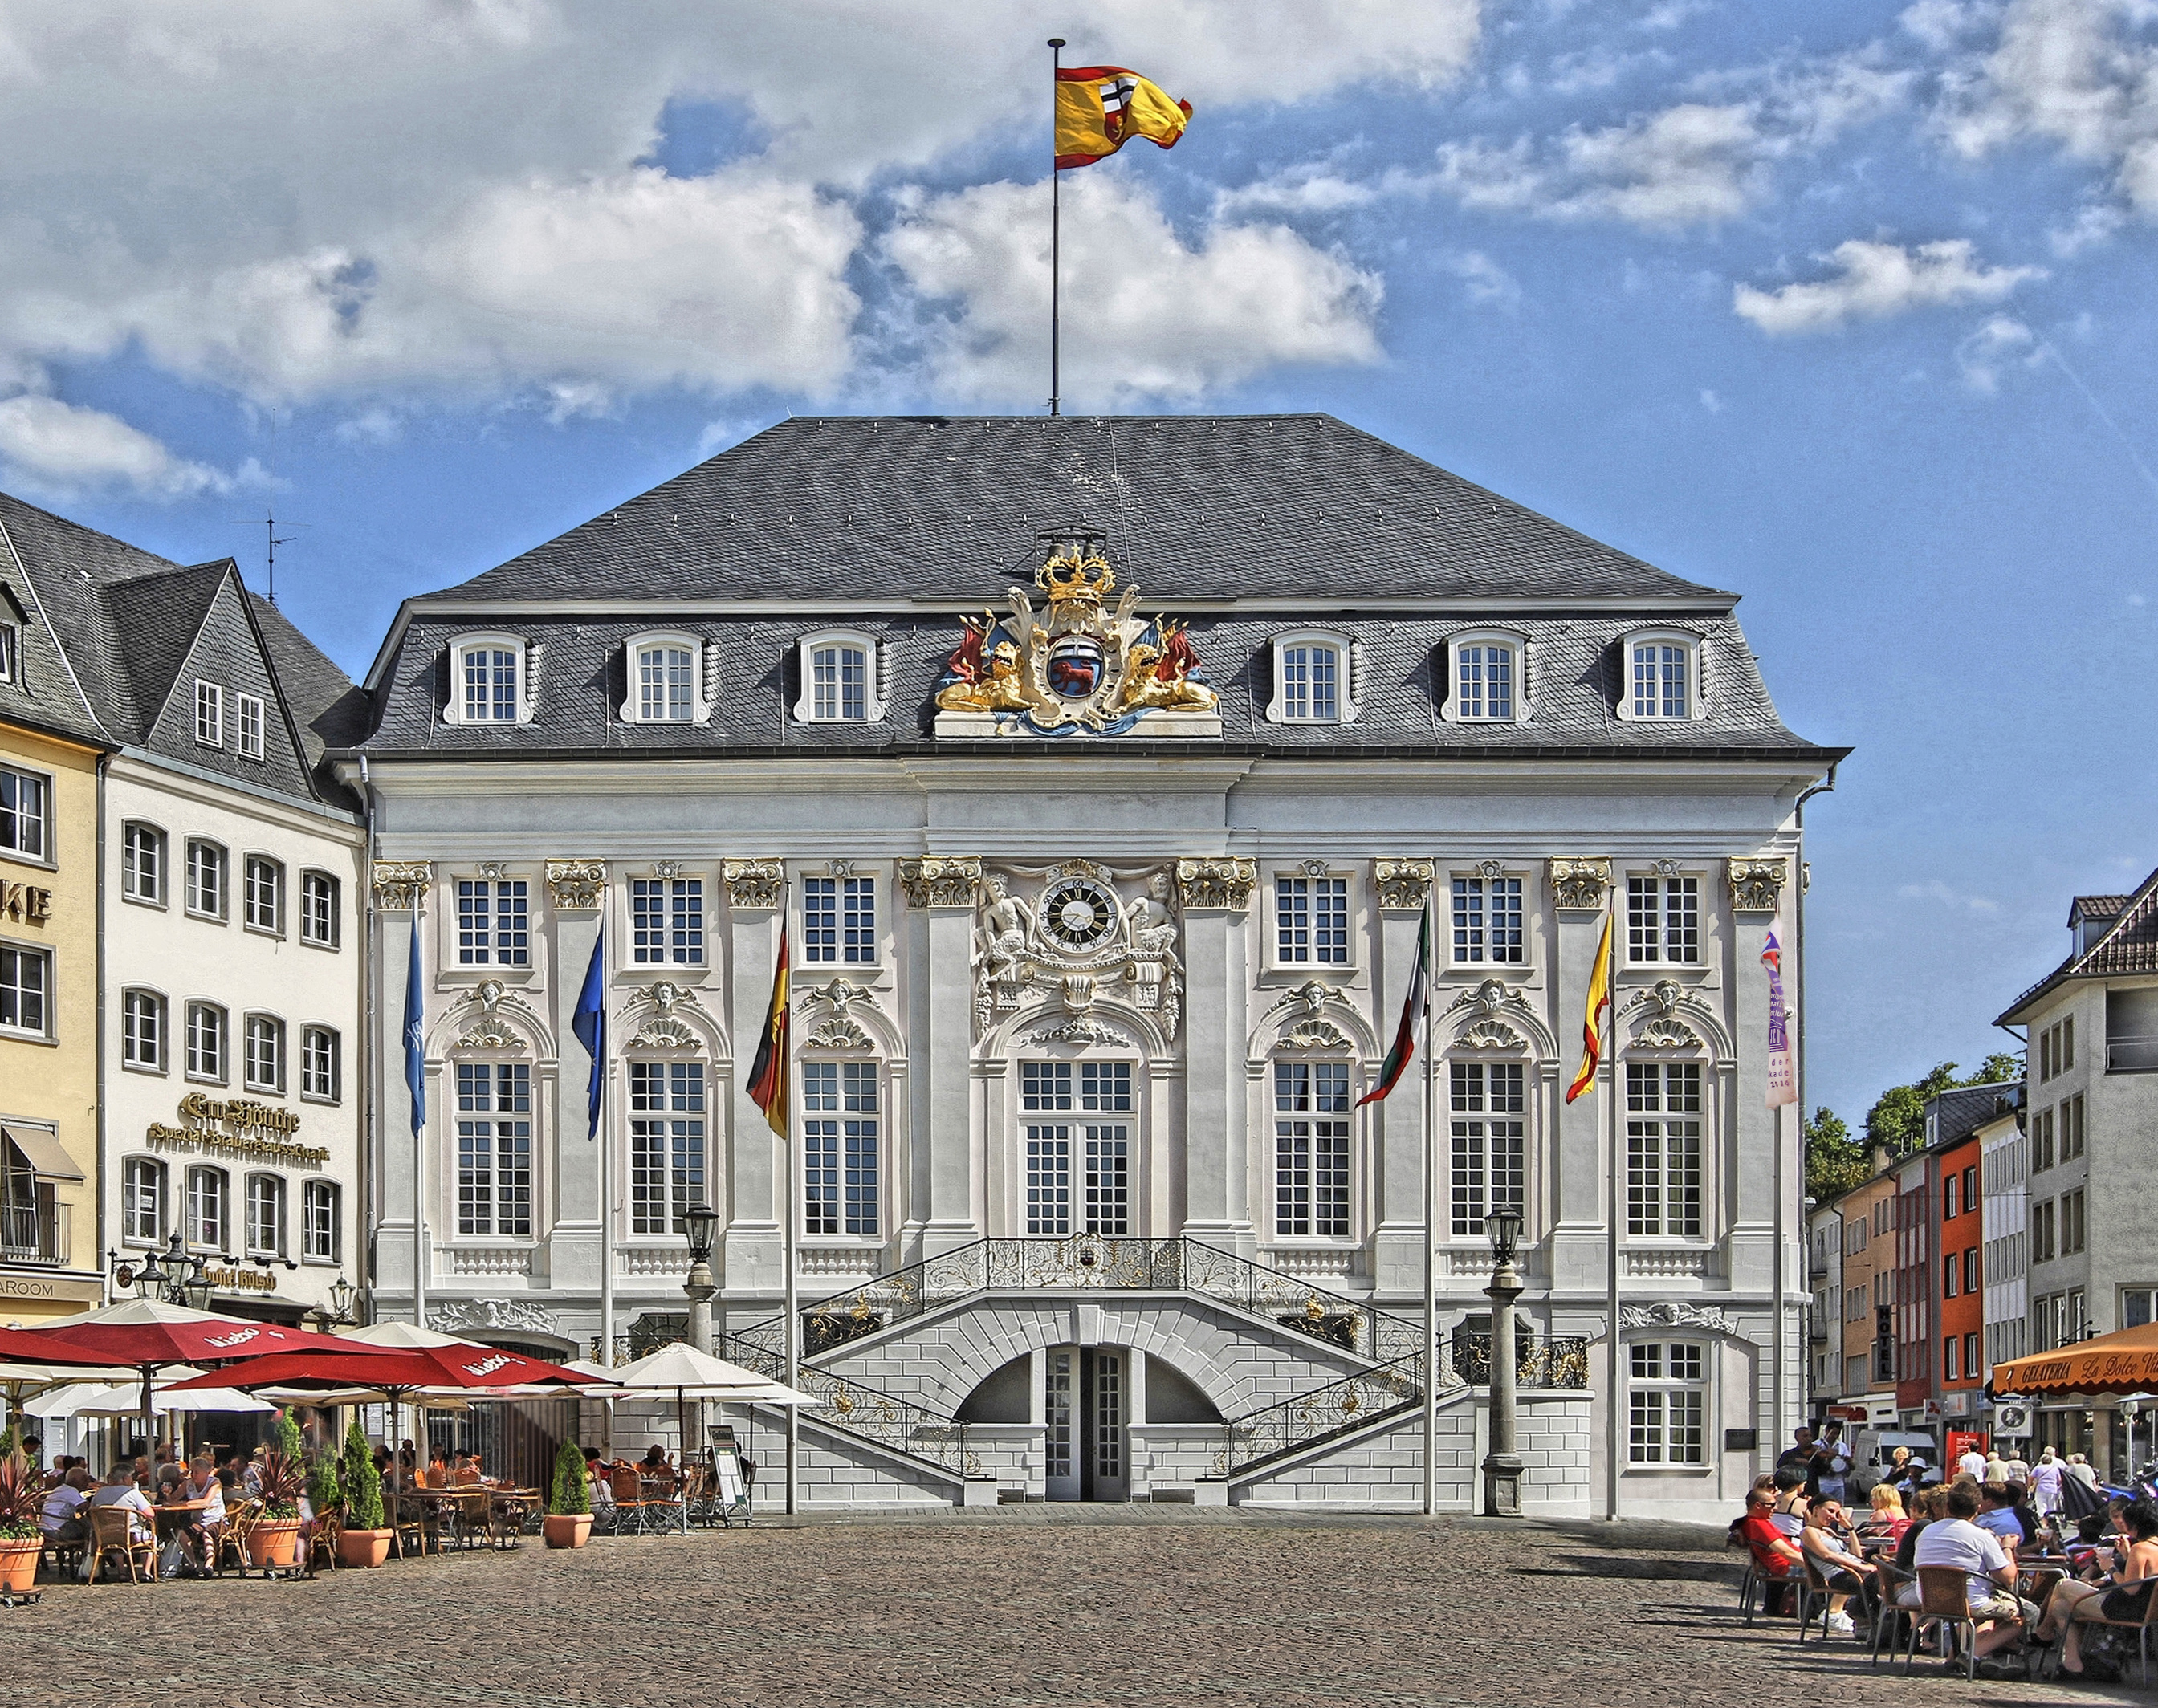 Bonn (Germany) - Old Town Hall at market place